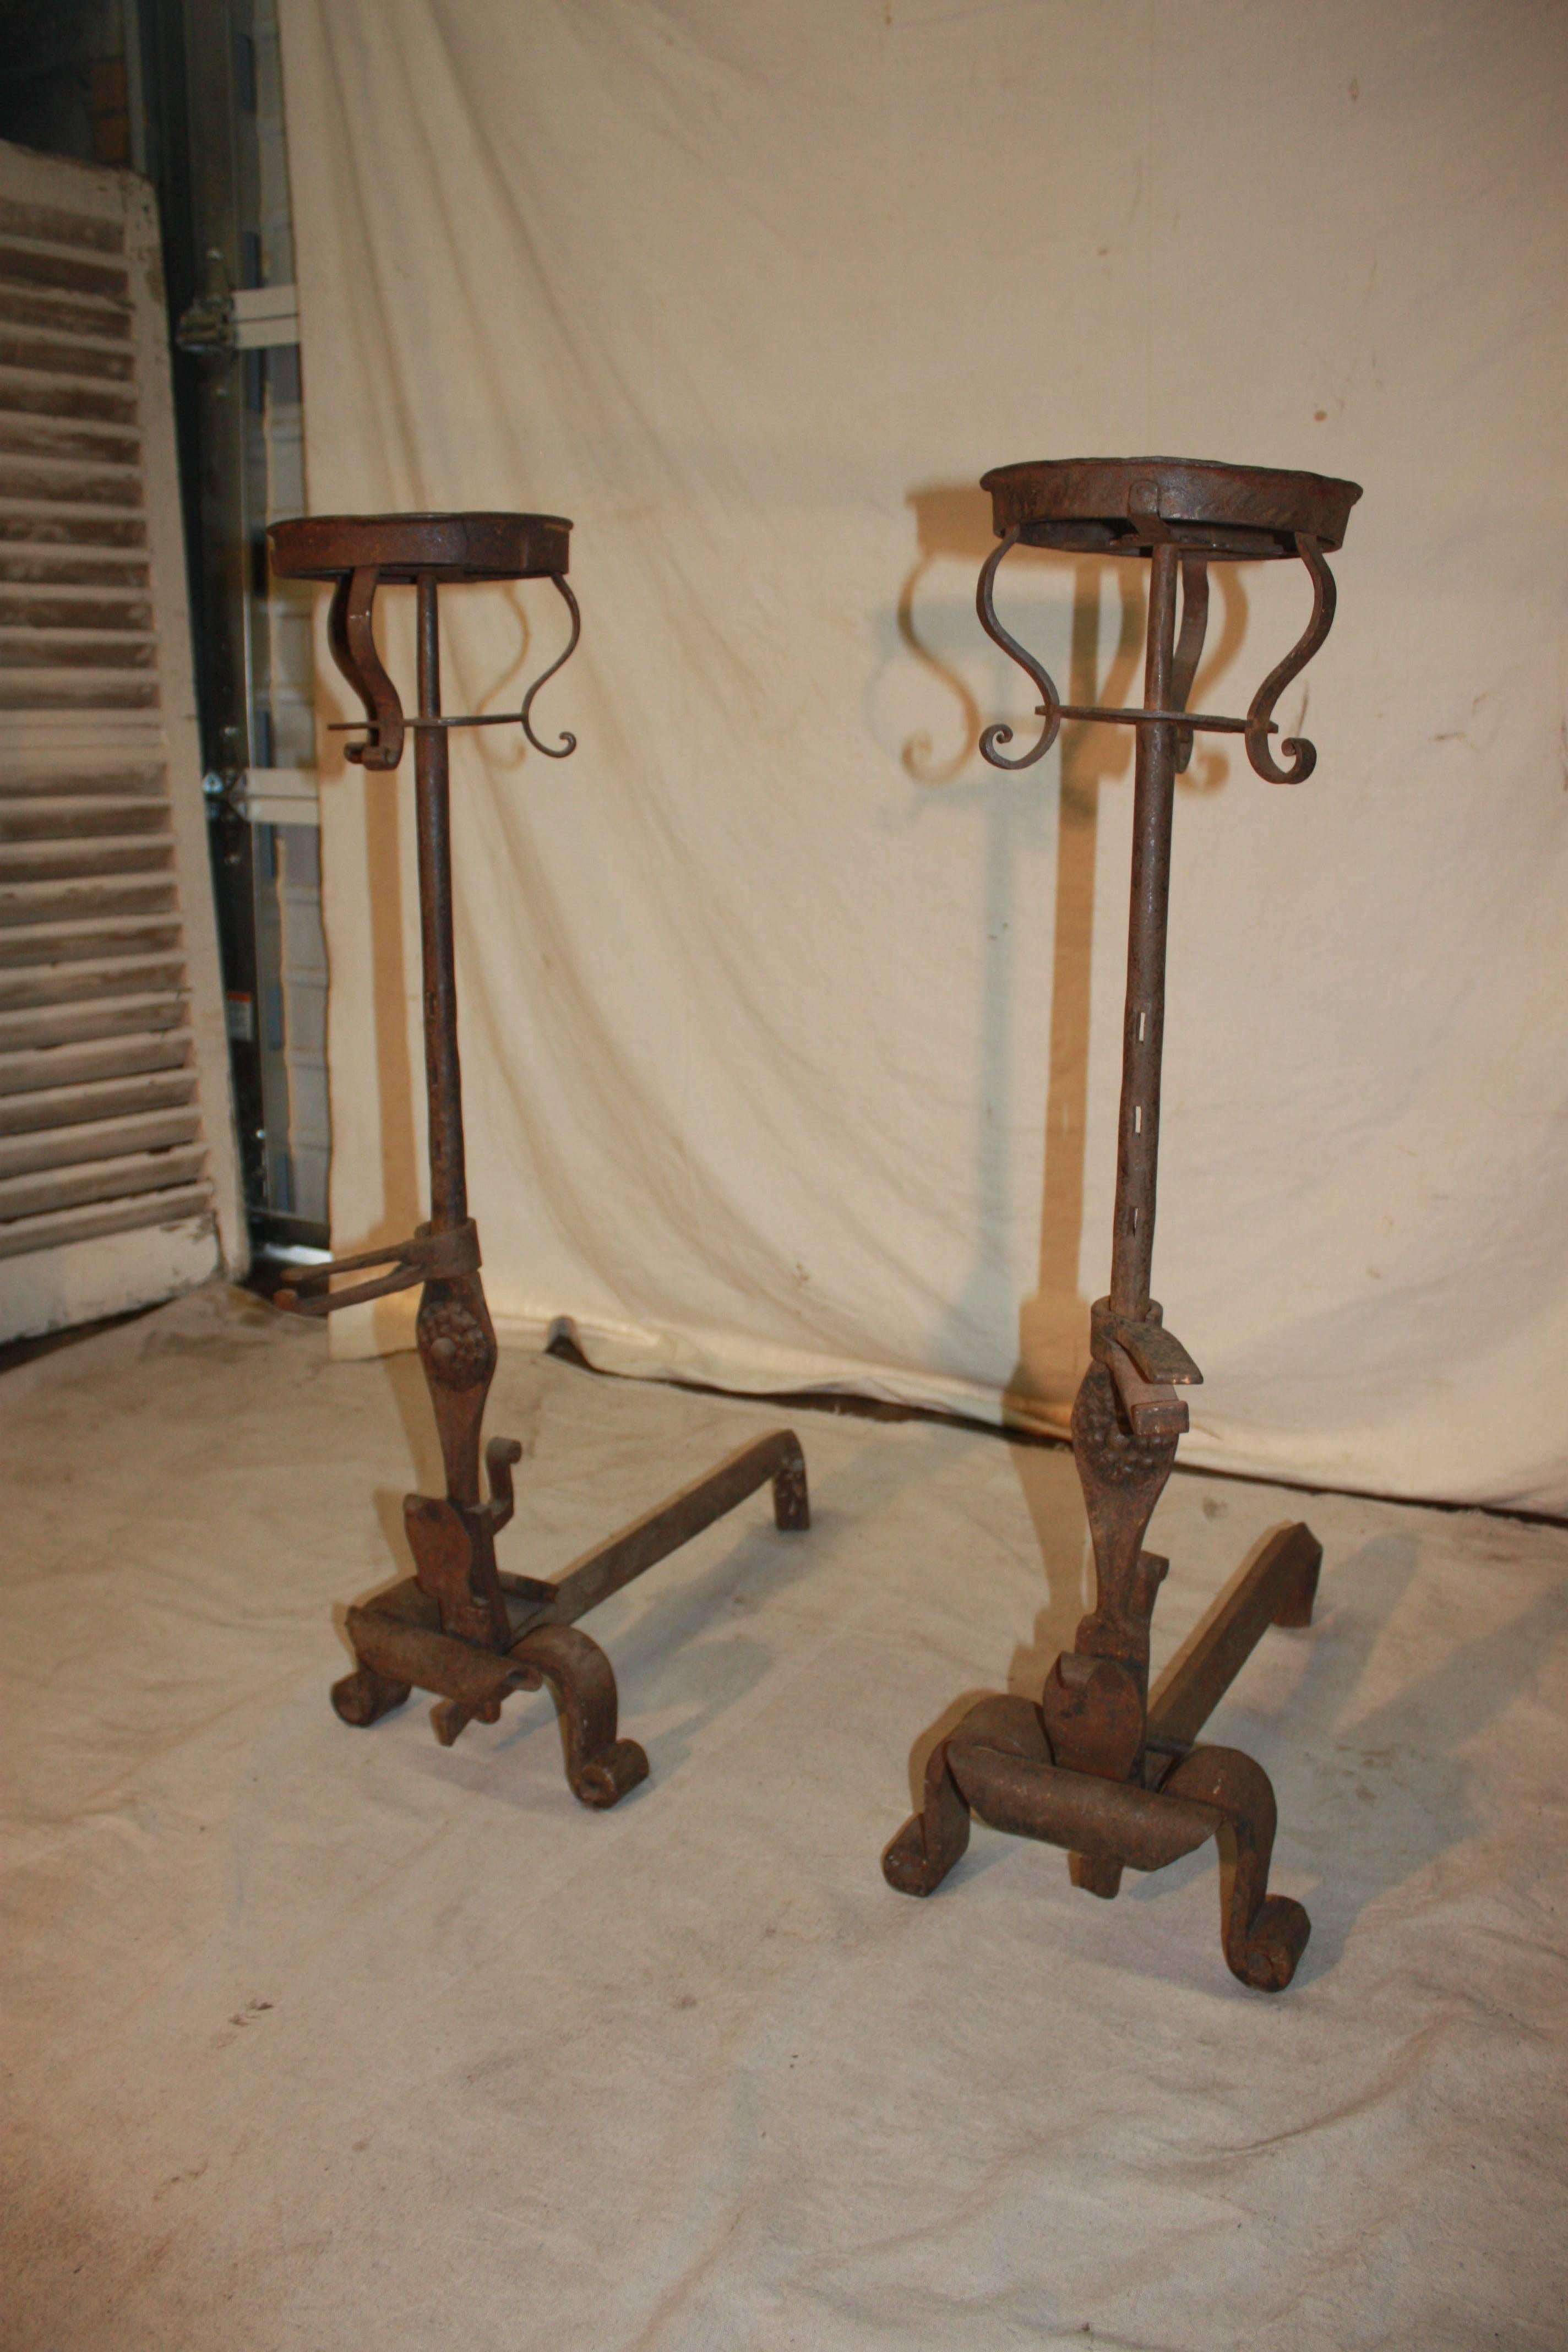 Pair of 18th century French andirons.